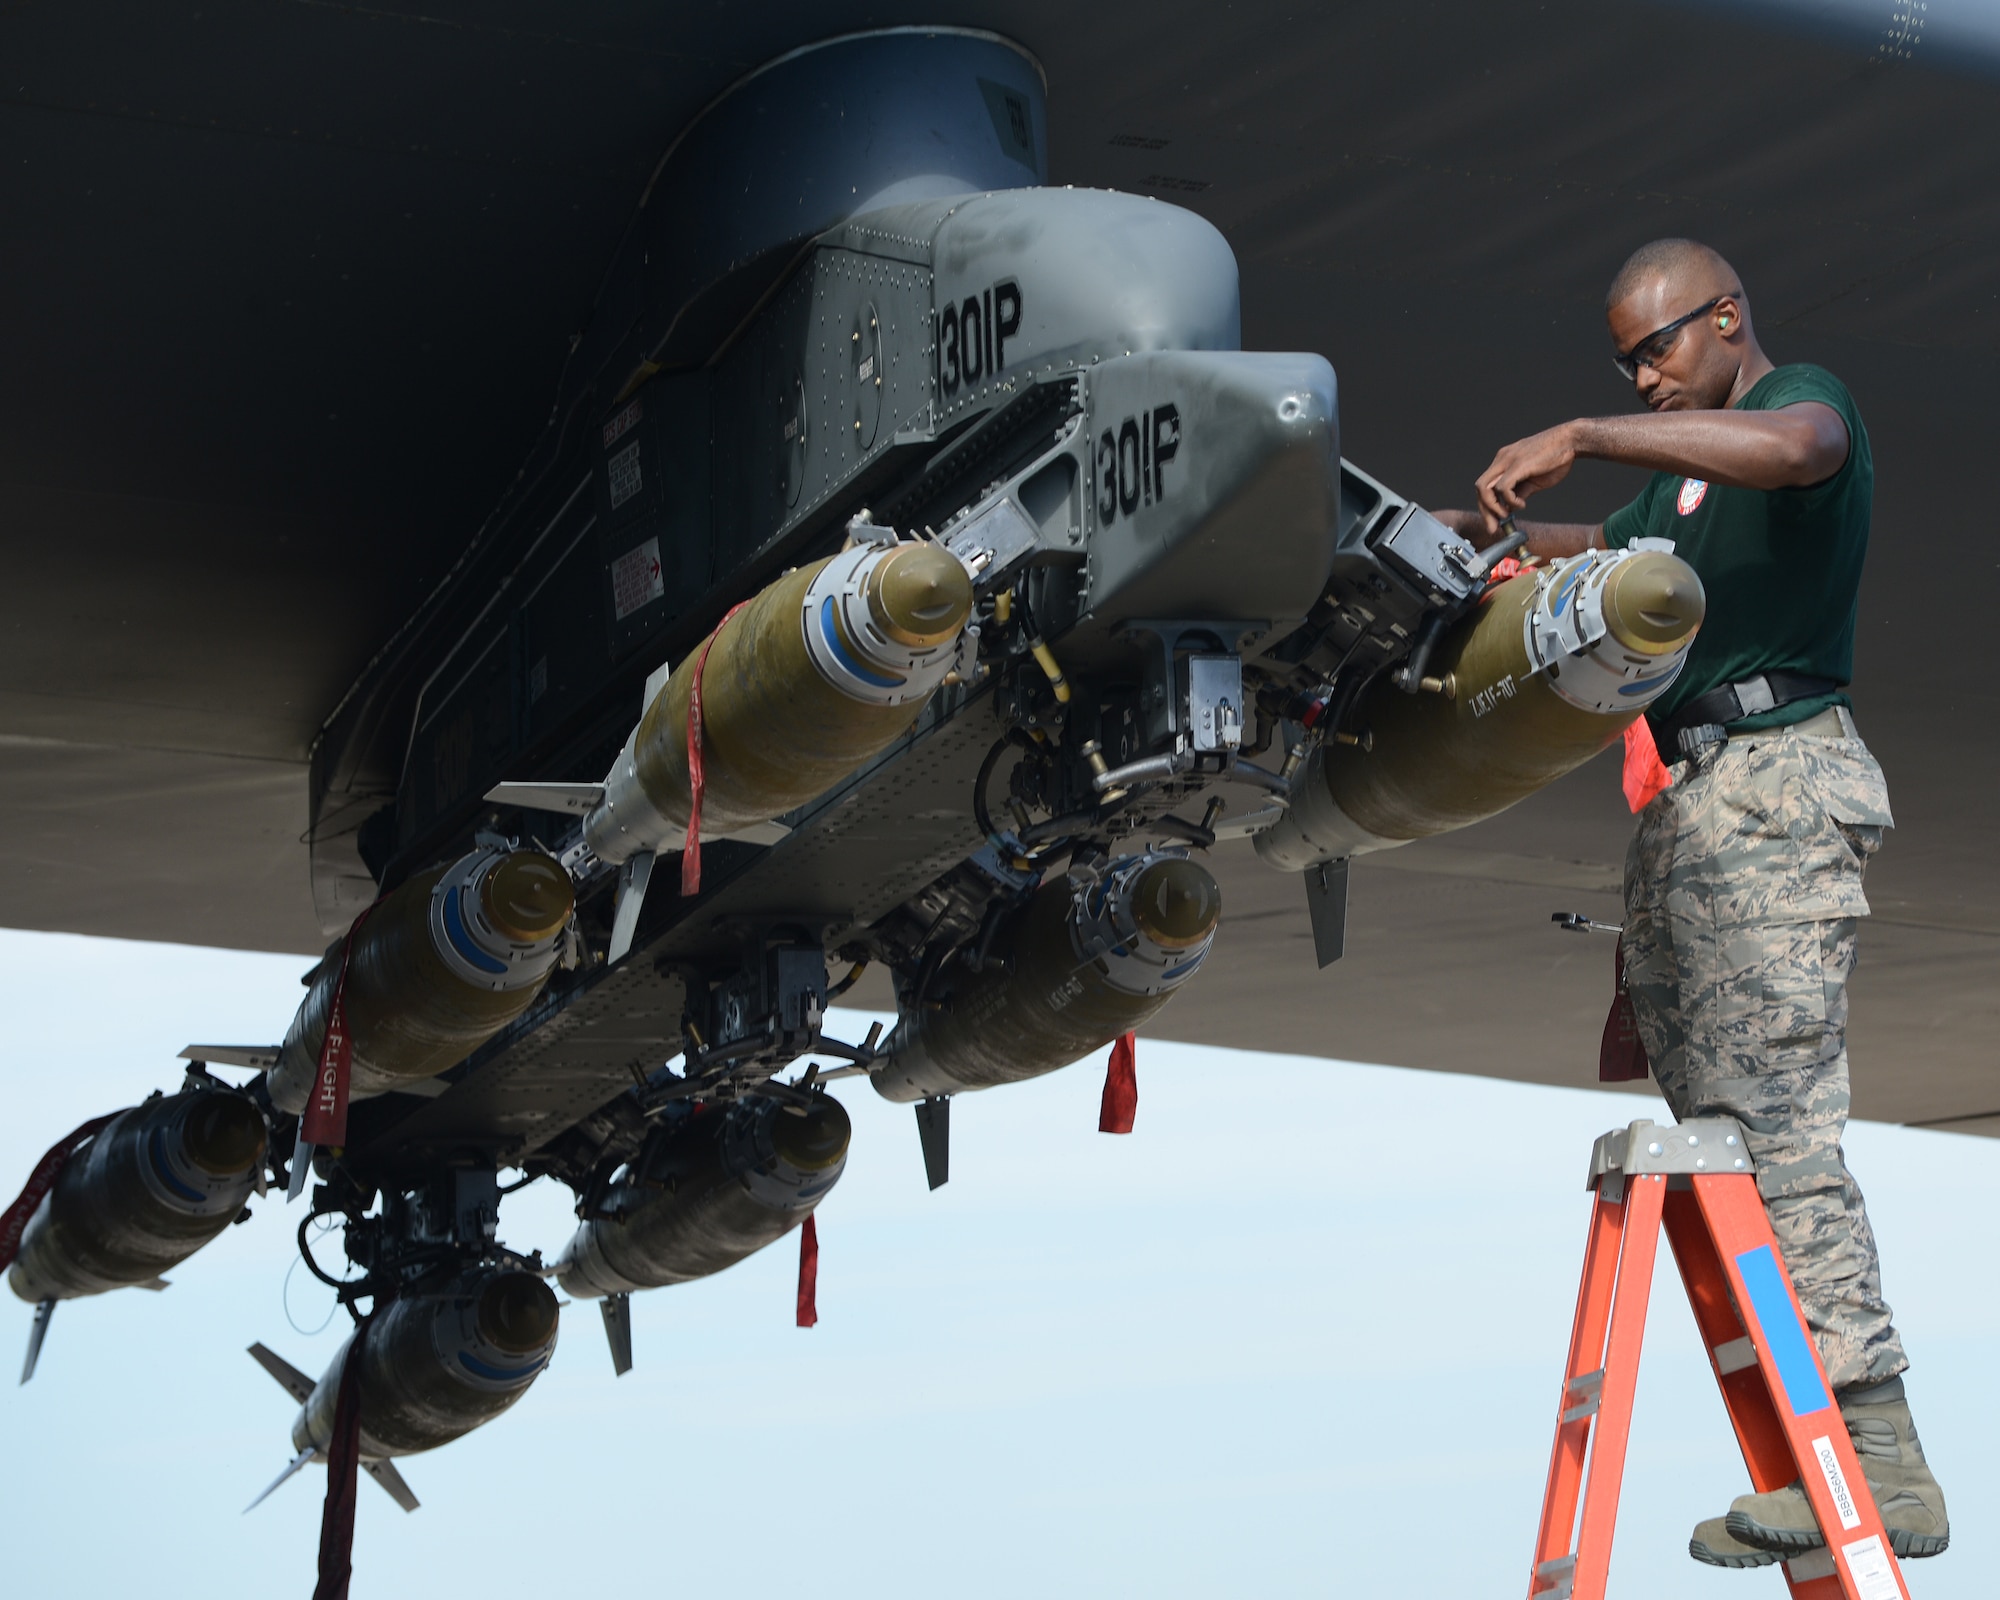 Staff Sgt. Stefano Cothran, 2nd Aircraft Maintenance Squadron weapons load team, secures a GBU-38 to a pylon during the 2014 Global Strike Challenge on Barksdale Air Force Base, La., Aug. 27. The goal of the challenge is to showcase the world's premier bomber force and foster esprit de corps through competition and teamwork. (U.S. Air Force photo/Senior Airman Benjamin Gonsier)